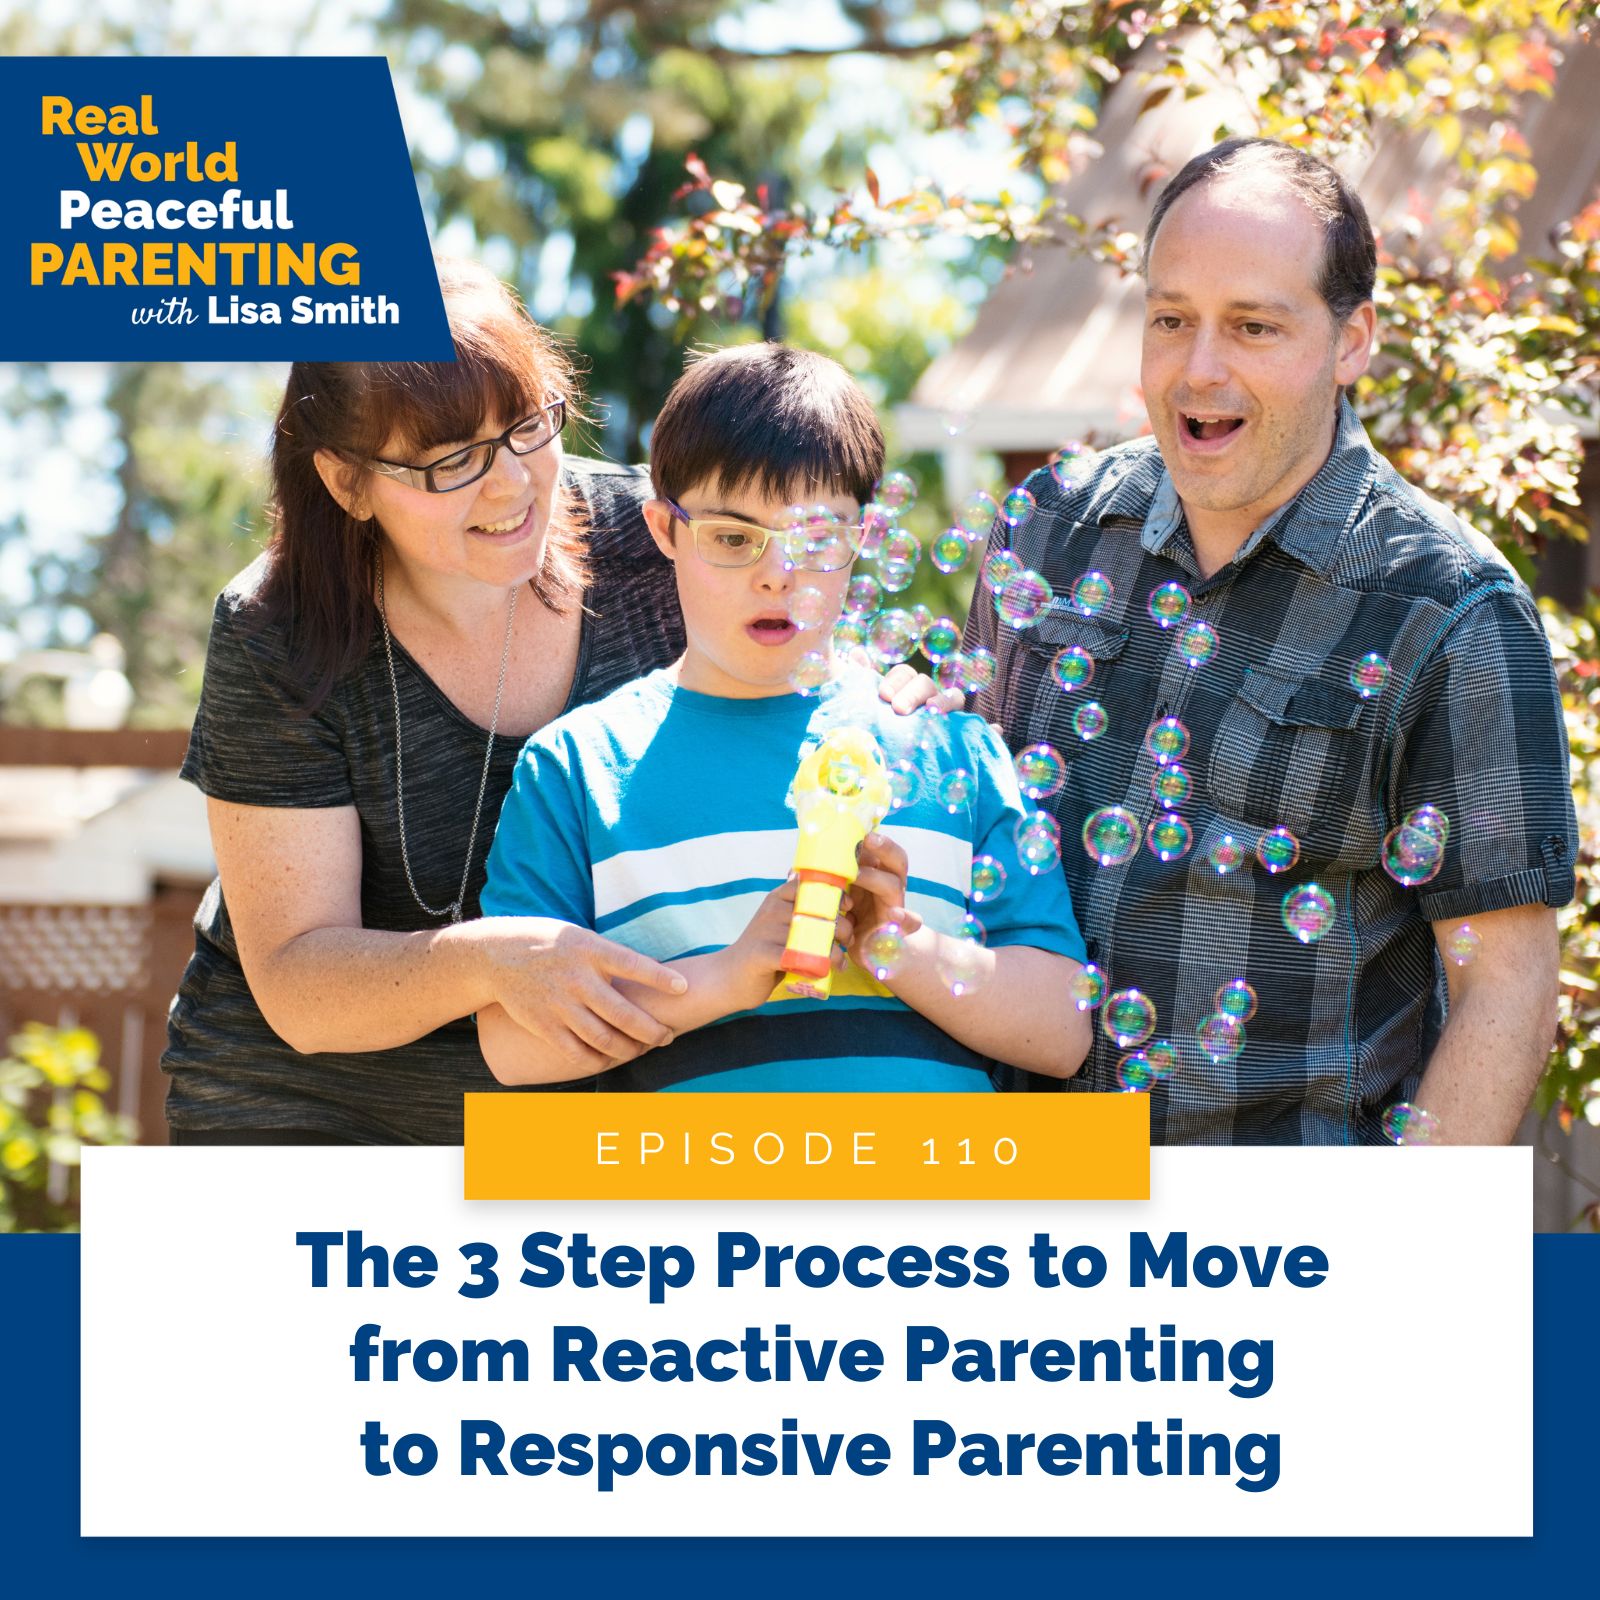 Real World Peaceful Parenting Lisa Smith | The 3 Step Process to Move from Reactive Parenting to Responsive Parenting